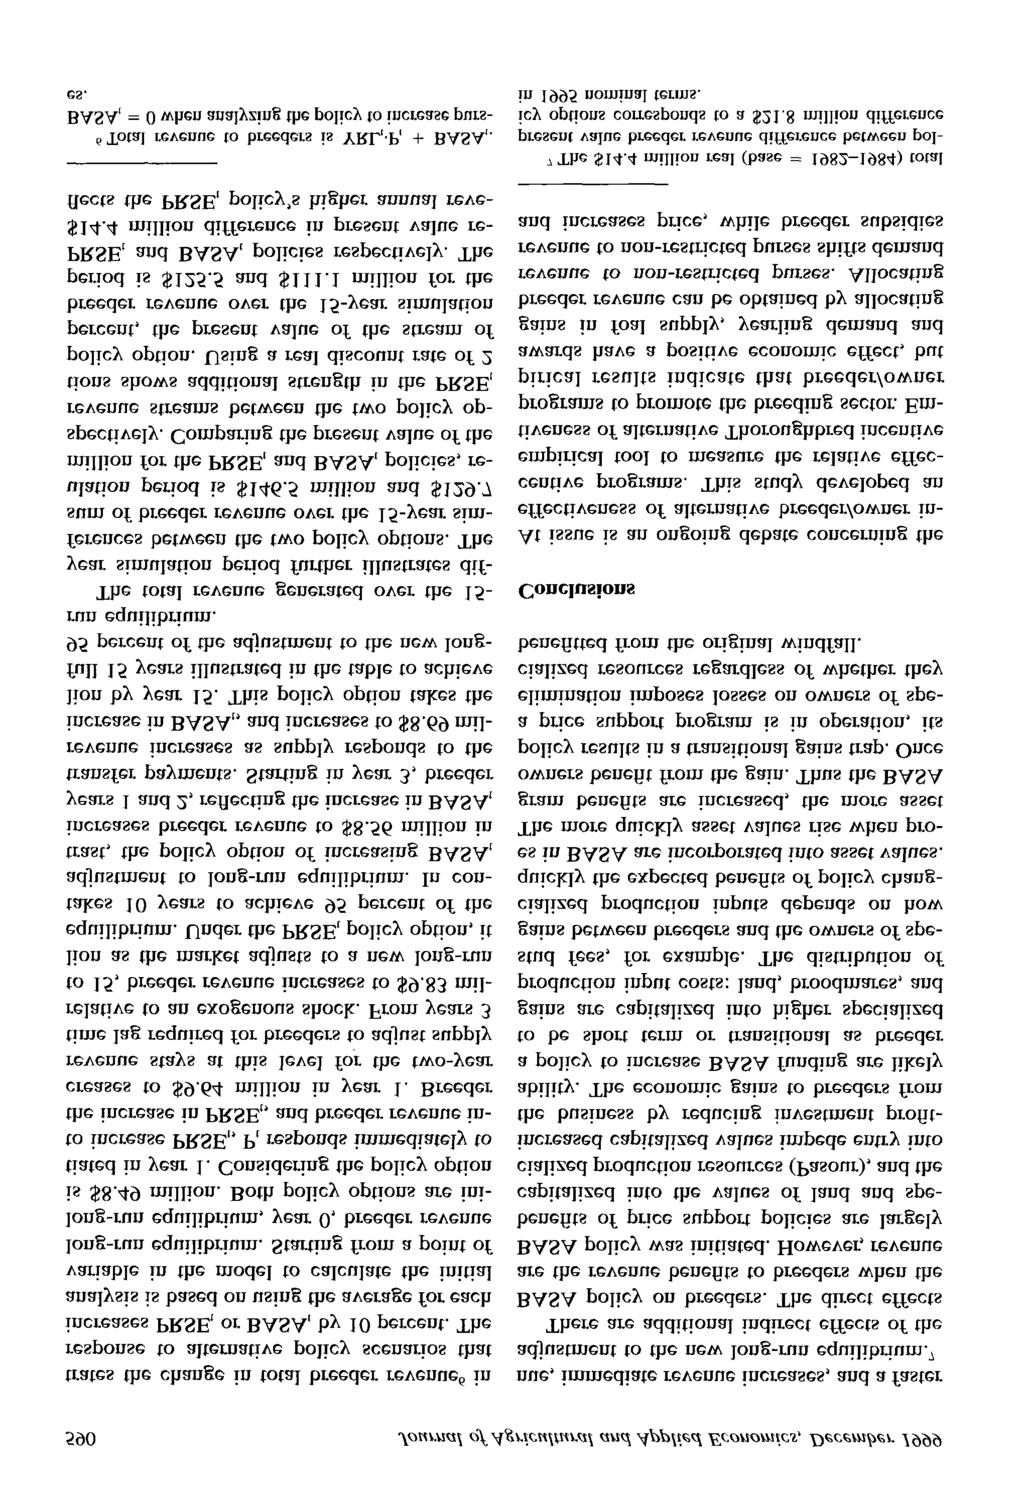 590 Journal of Agricultural and Applied Economics, December 1999 trates the change in total breeder revenuec in response to alternative policy scenarios that increases PRSE~ or BASA~ by 10 percent.